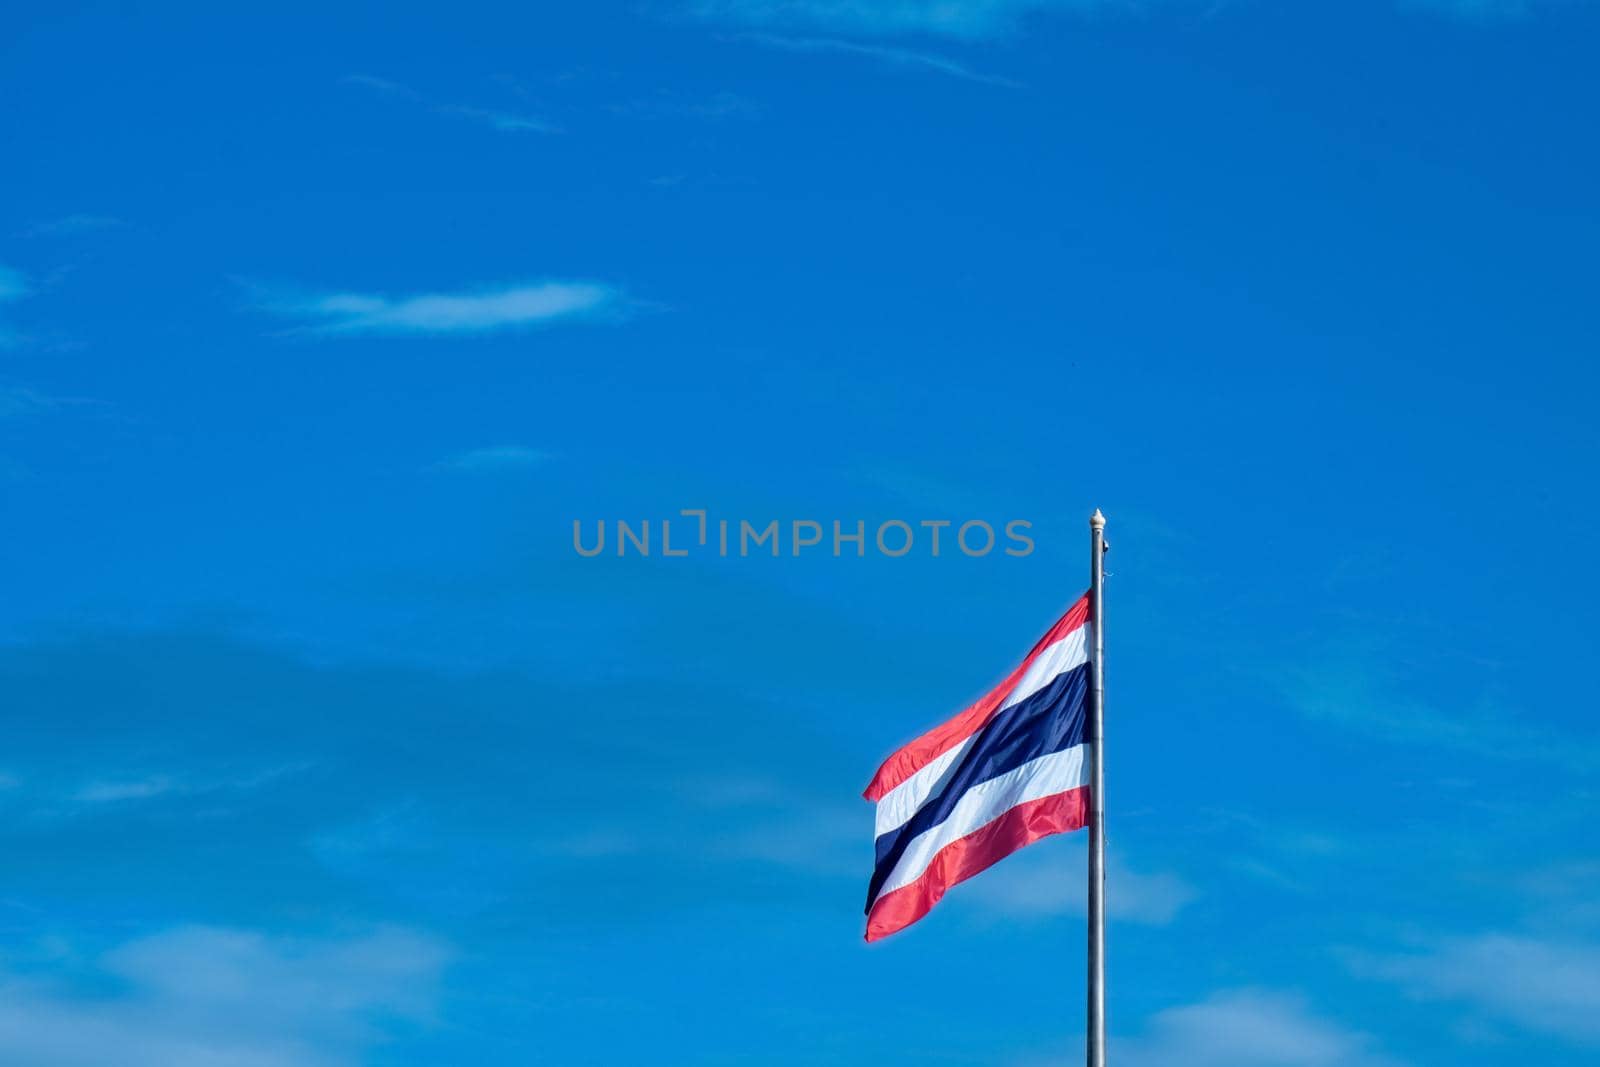 National Flag of Thailand on pole against nature blue sky background.